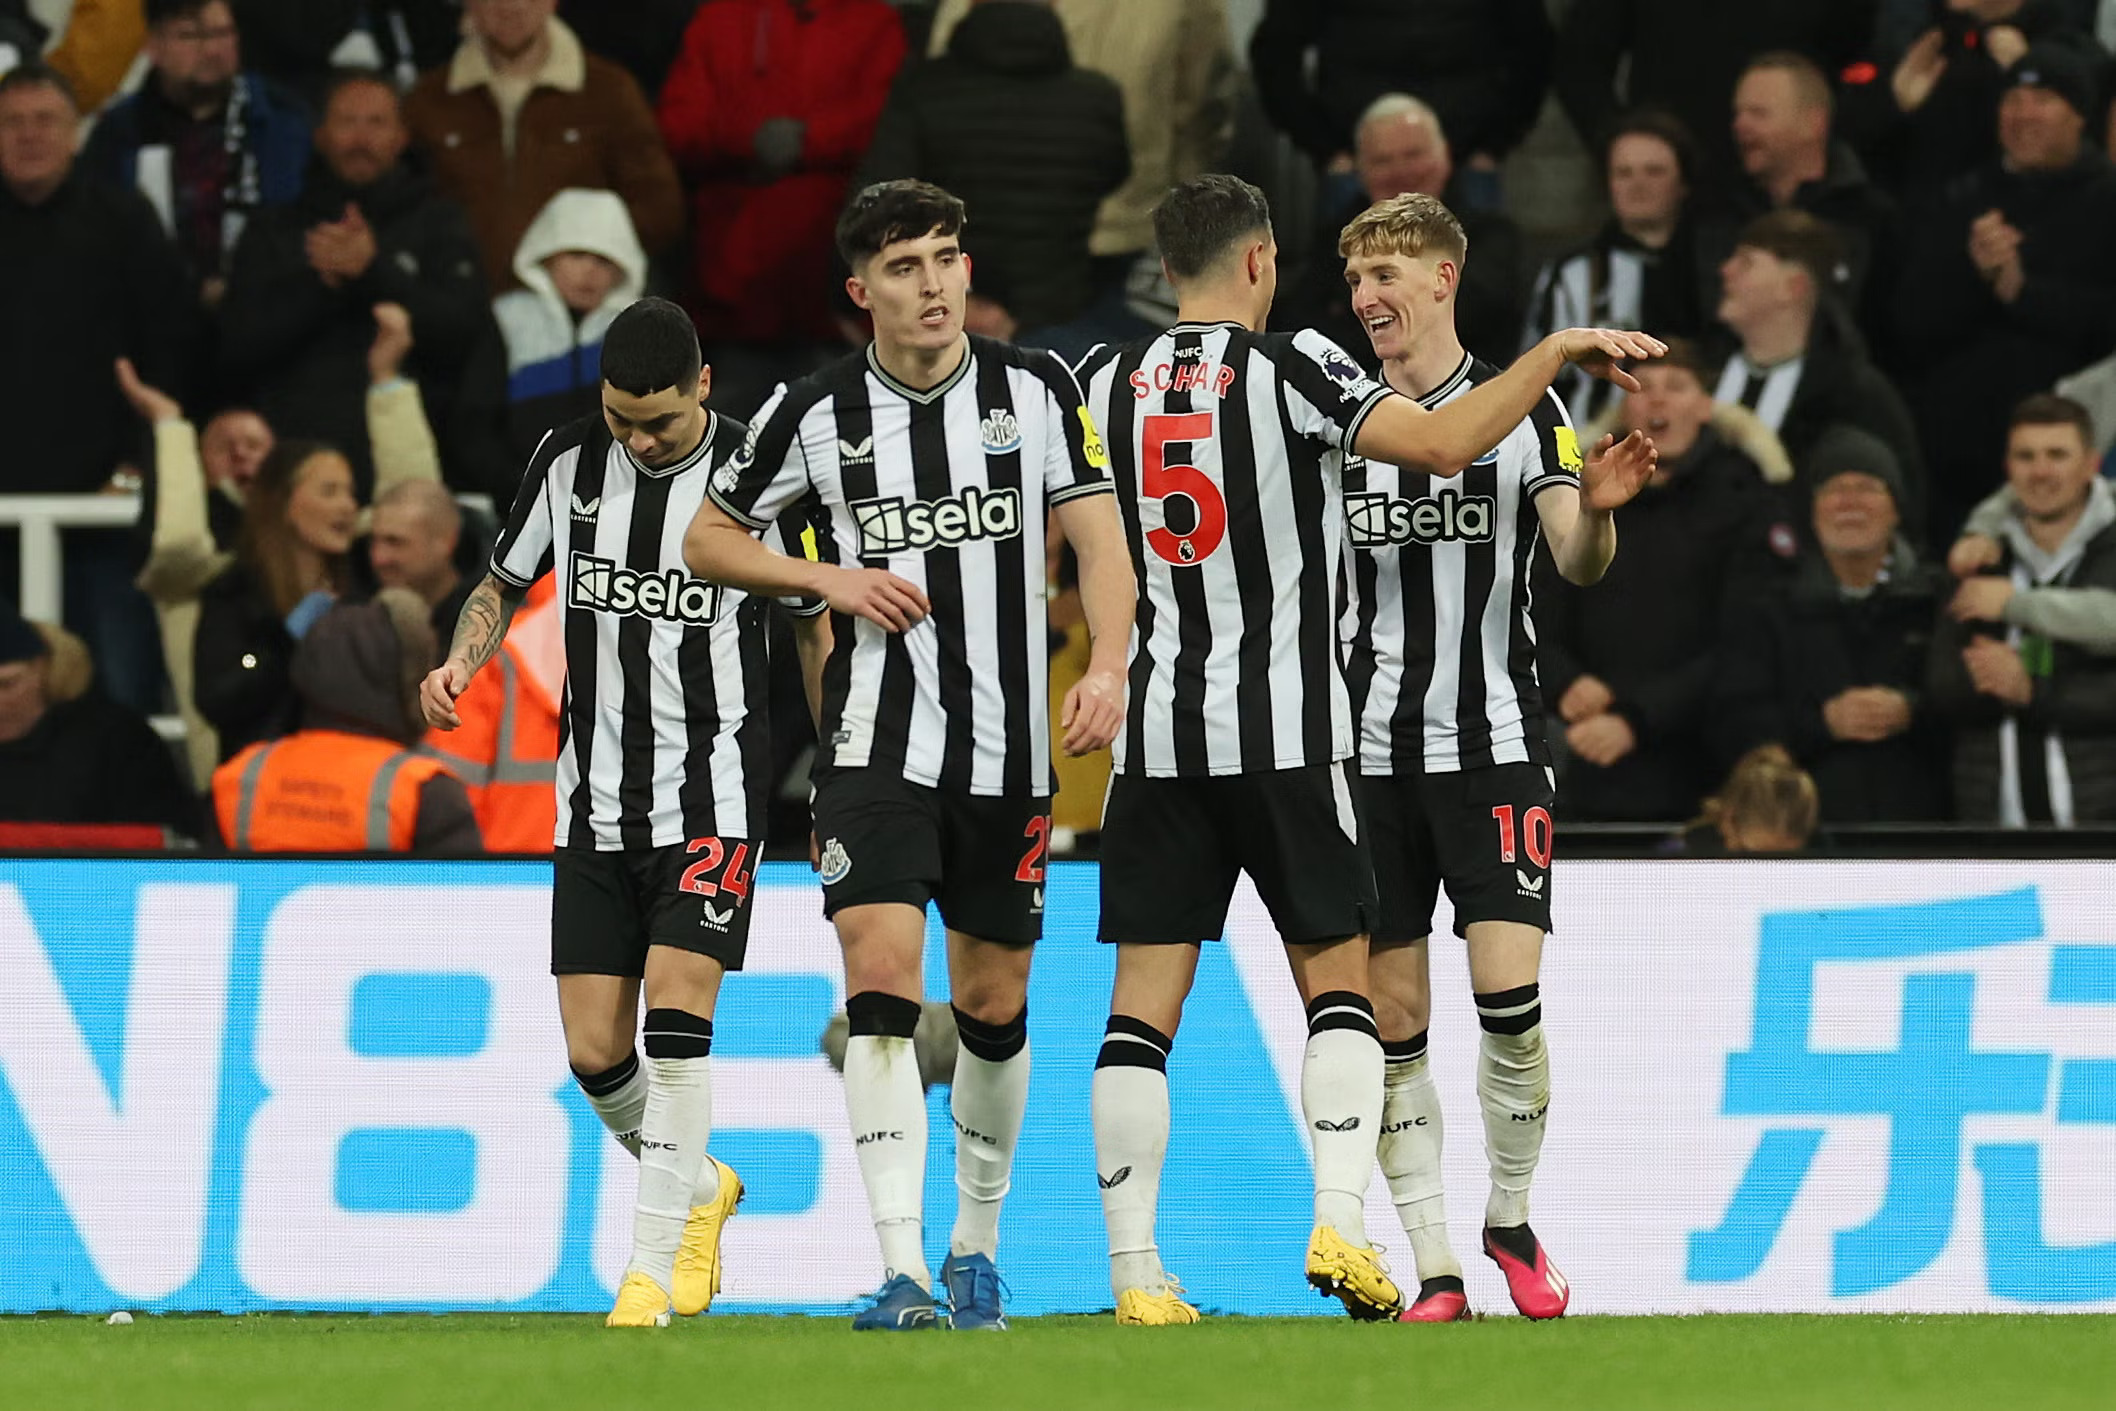 Second-half goals from Jamaal Lascelles, Joelinton, and Anthony Gordon allowed Newcastle to return to winning days in the Premier League with a decisive win over Chelsea at St James' Park.